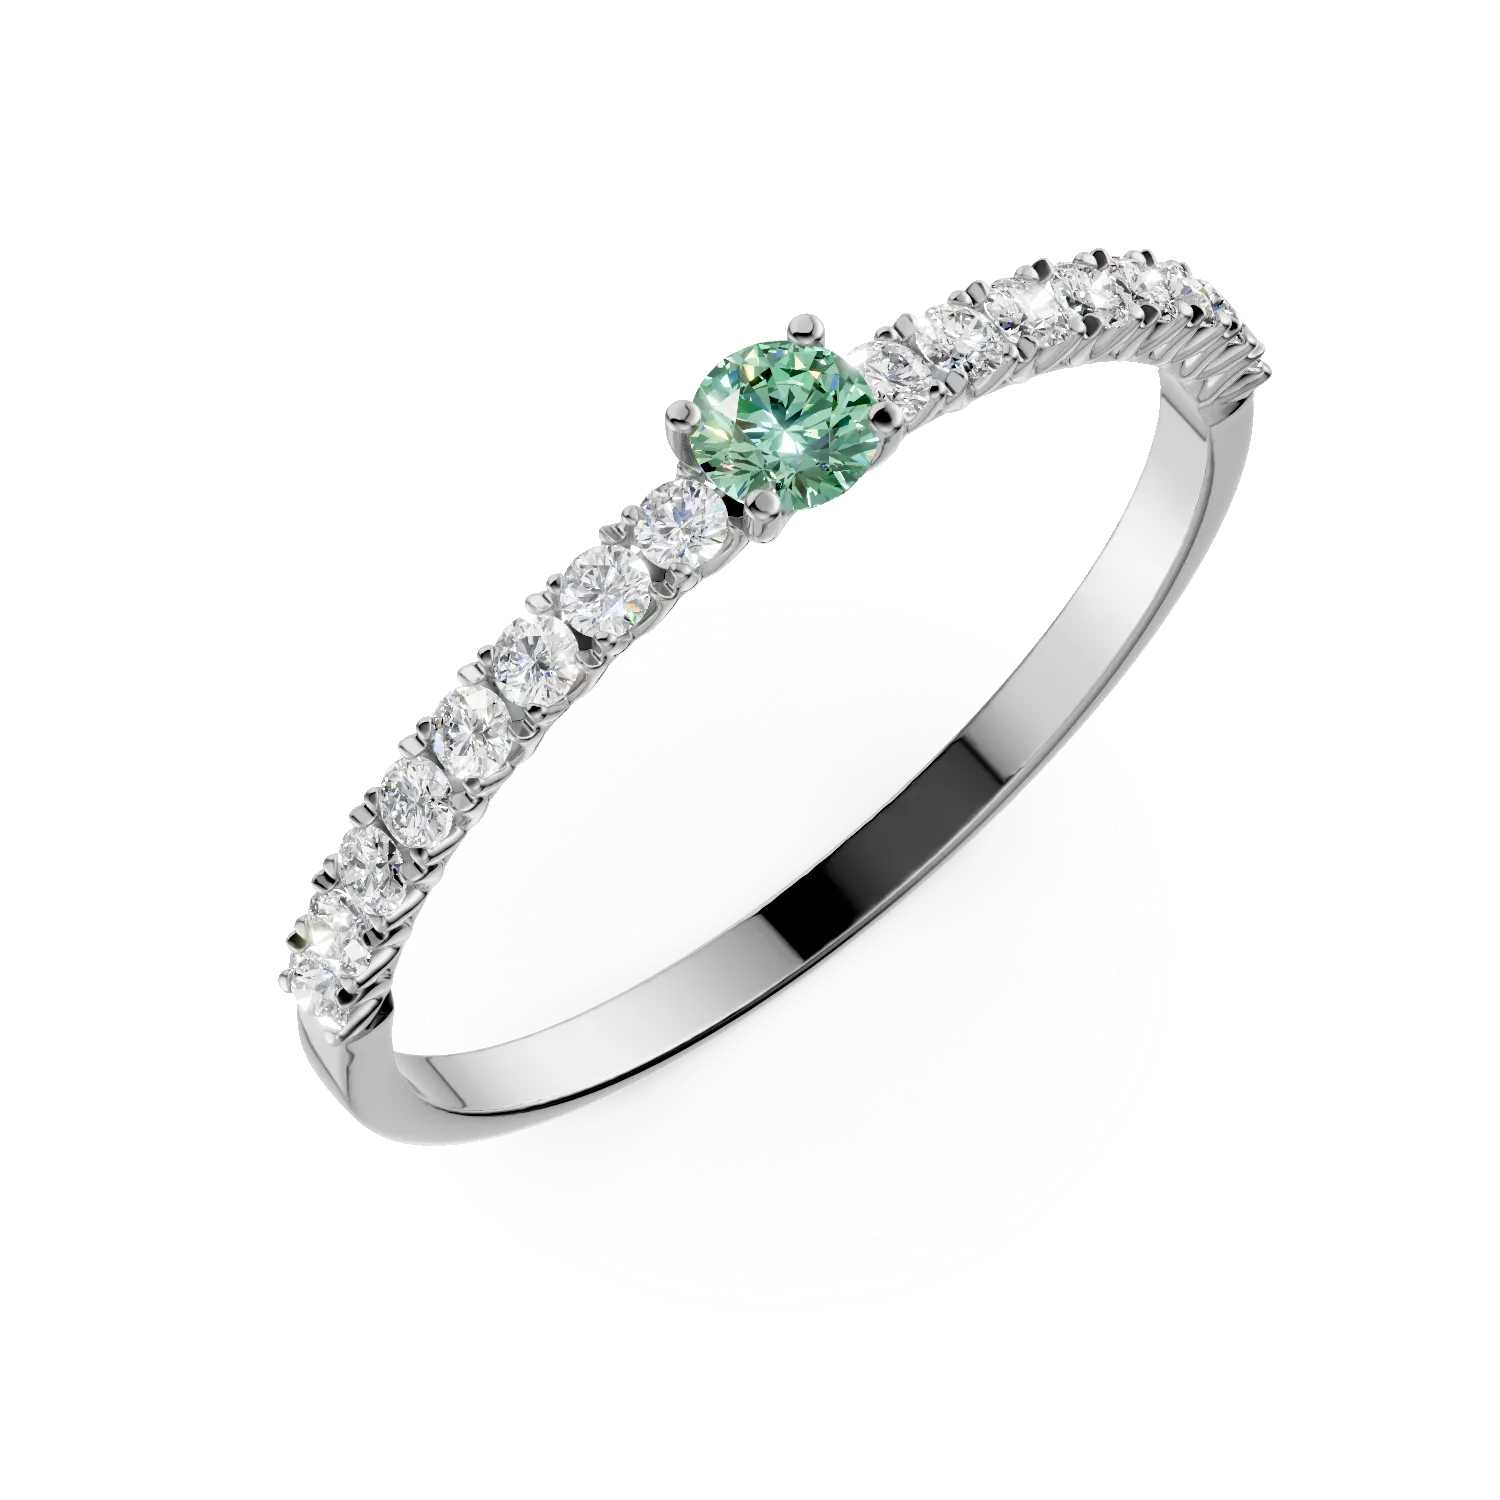 White gold engagement ring with 0.12ct emerald and 0.2ct diamonds